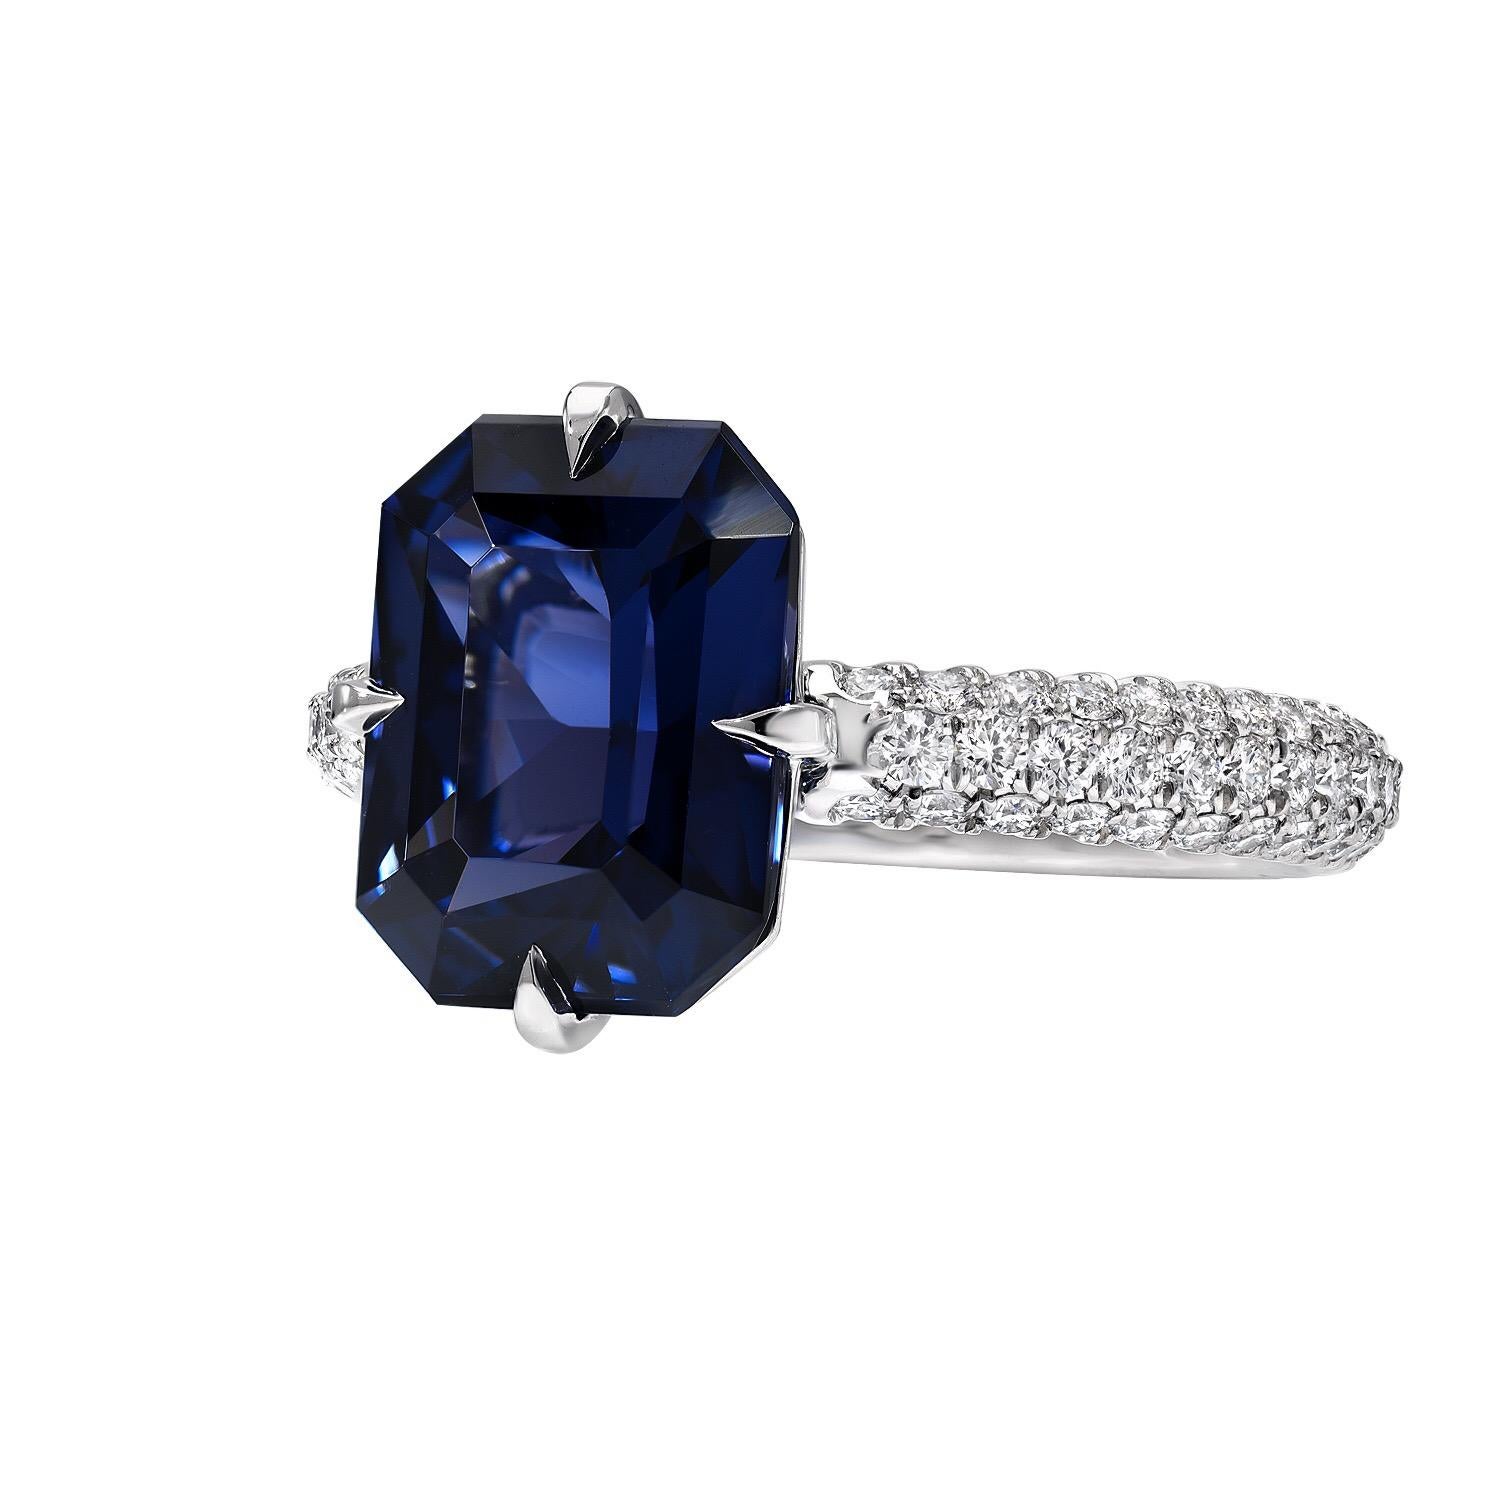 Blue Spinel Ring 4.01 Carat Emerald Cut For Sale 1